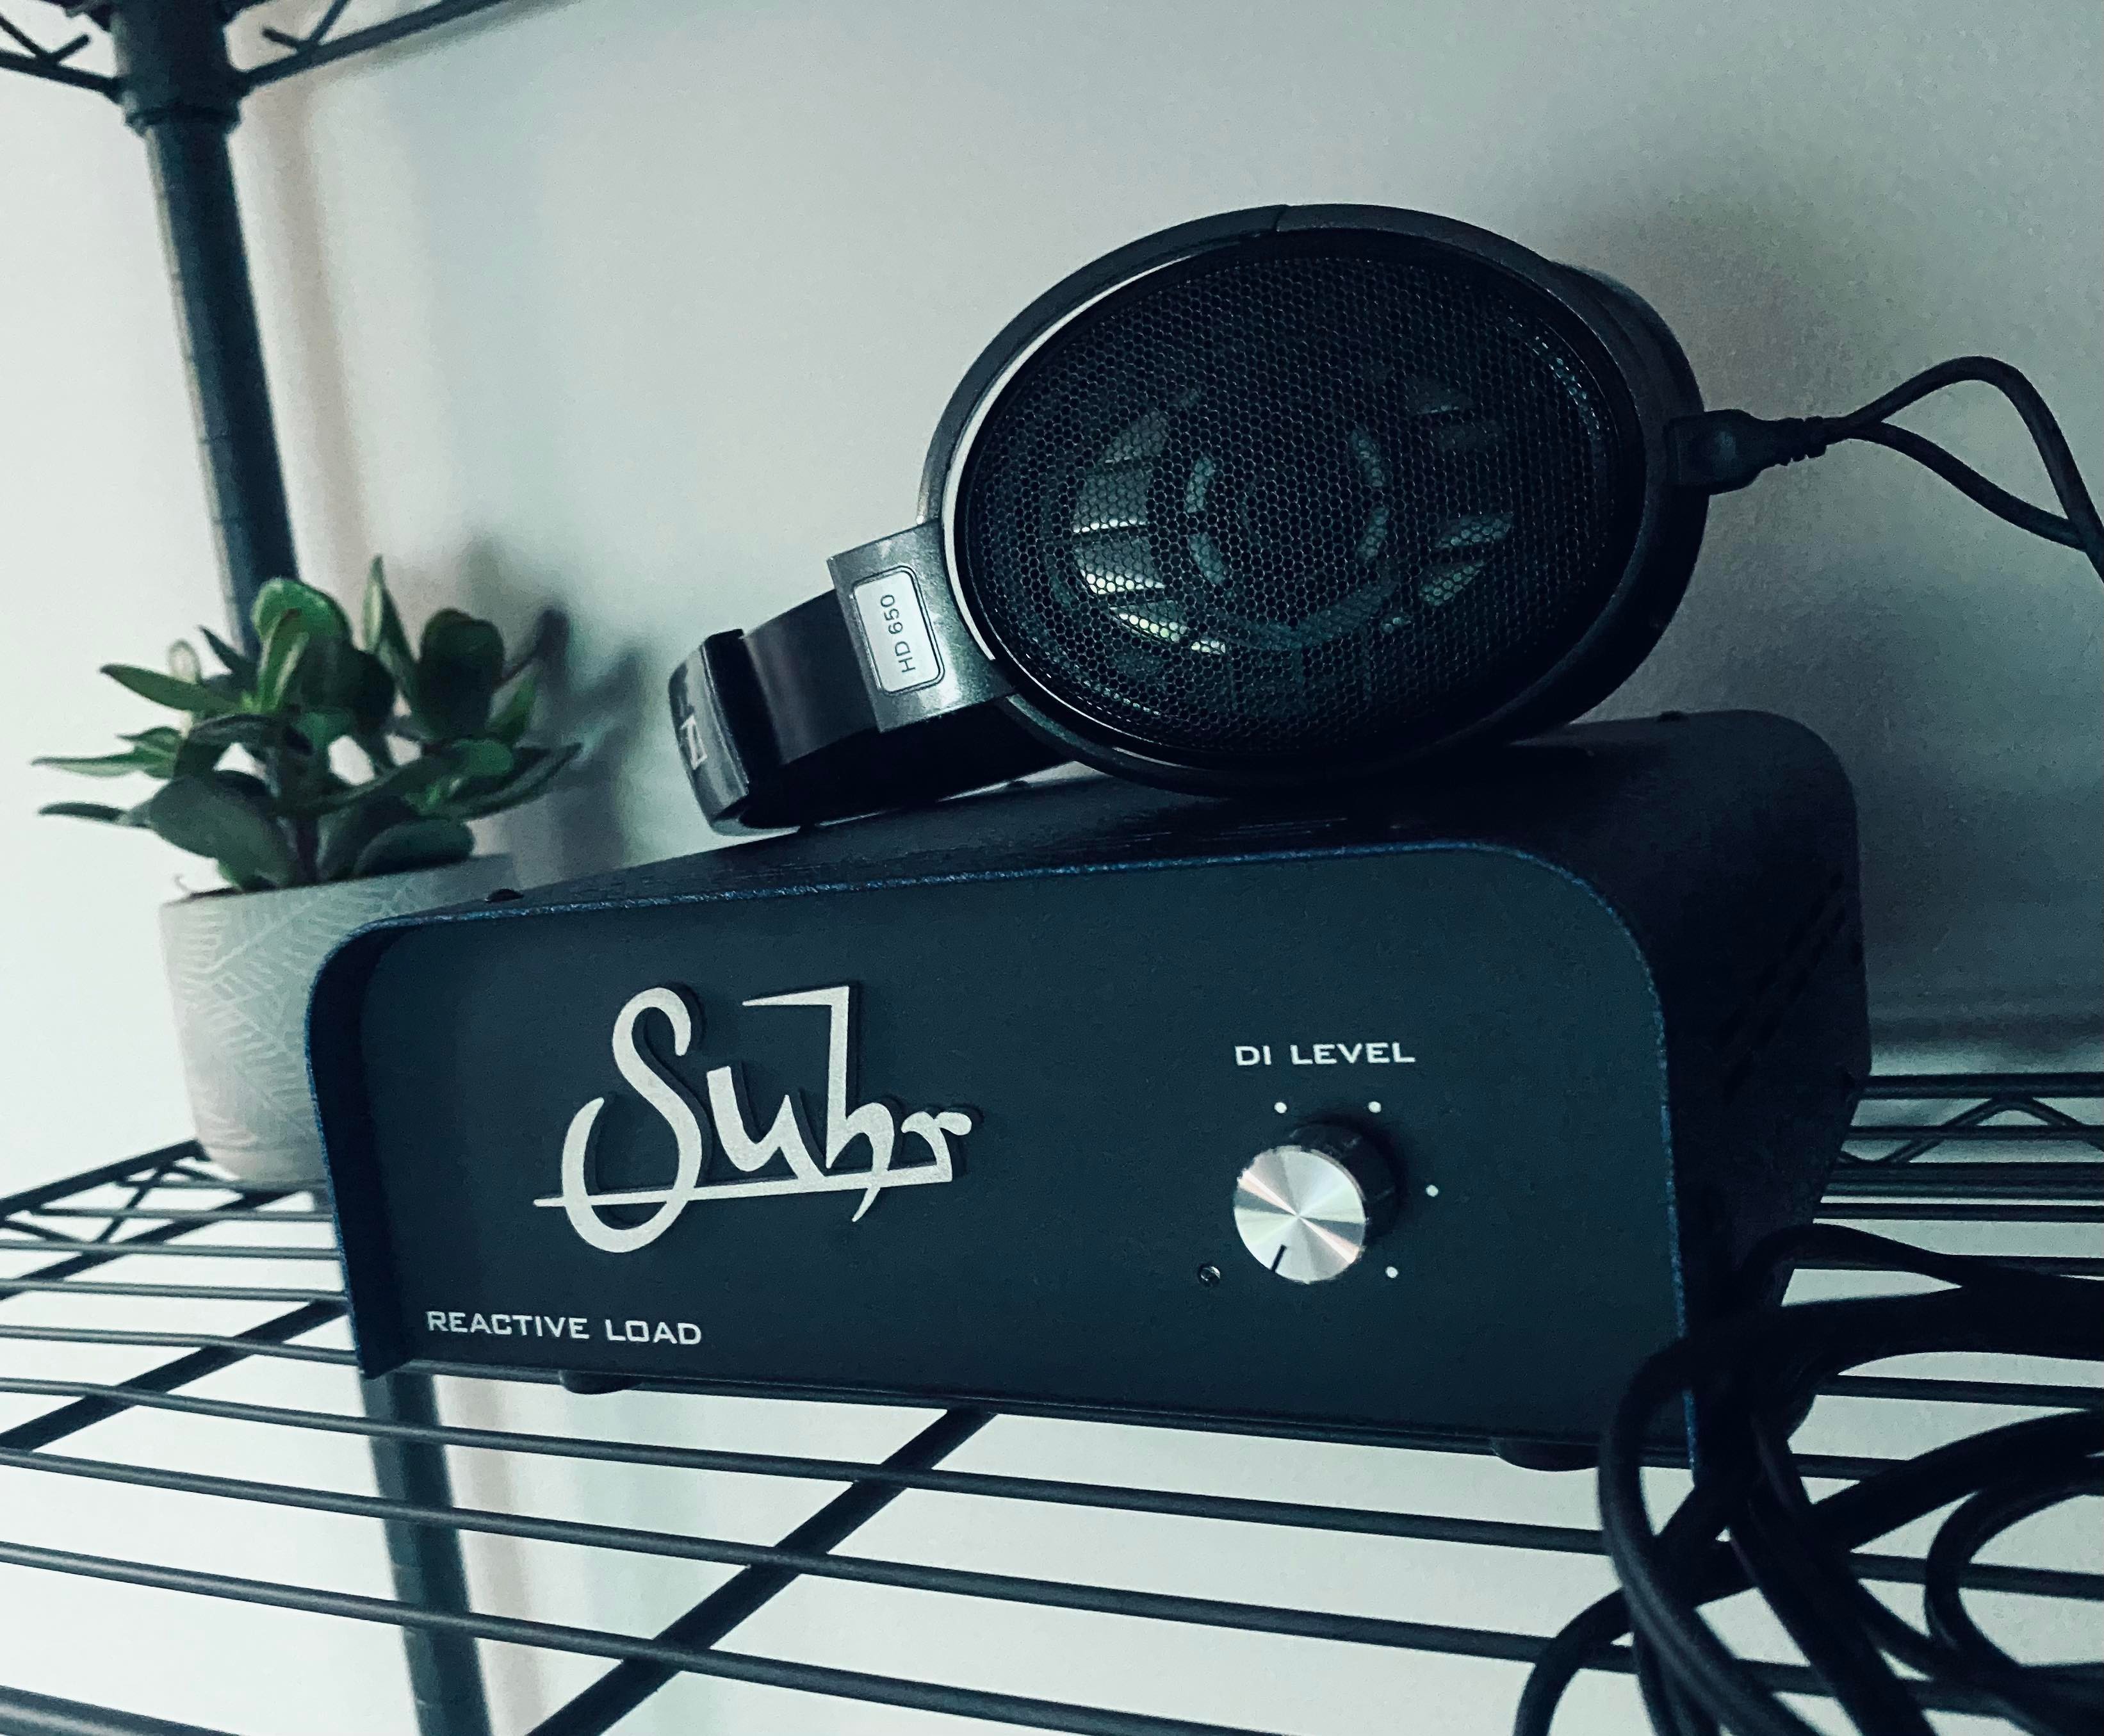 Suhr Reactive Load and Sennheiser HD650 open back headphones. Image courtesy of Will Bowden (Instagram @willtombowden).